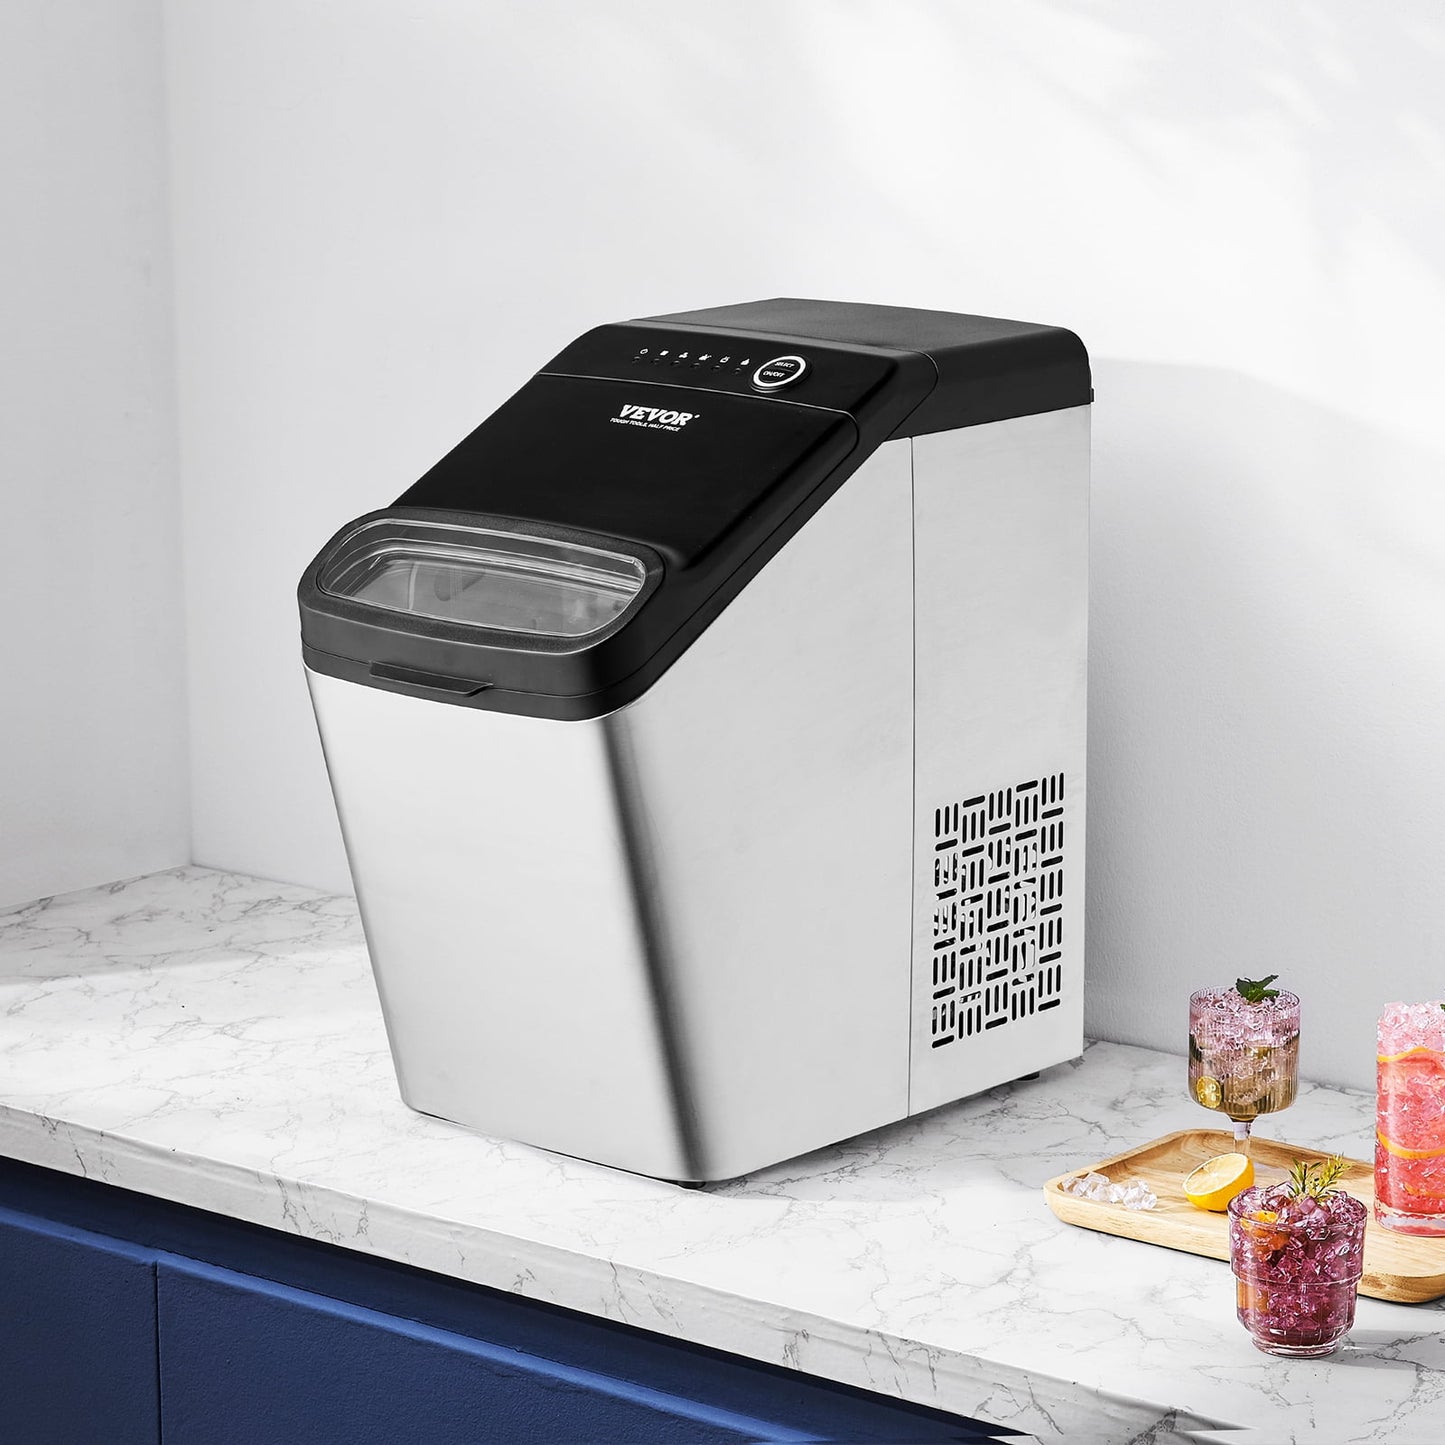 BENTISM Portable Countertop Ice Maker 33lbs/24H,Manual & Auto Refill Self-Cleaning with Scoop Basket,9 Cubes Ready in 7 Minutes, with Scoop and Basket 「00000000ABCDEFG」